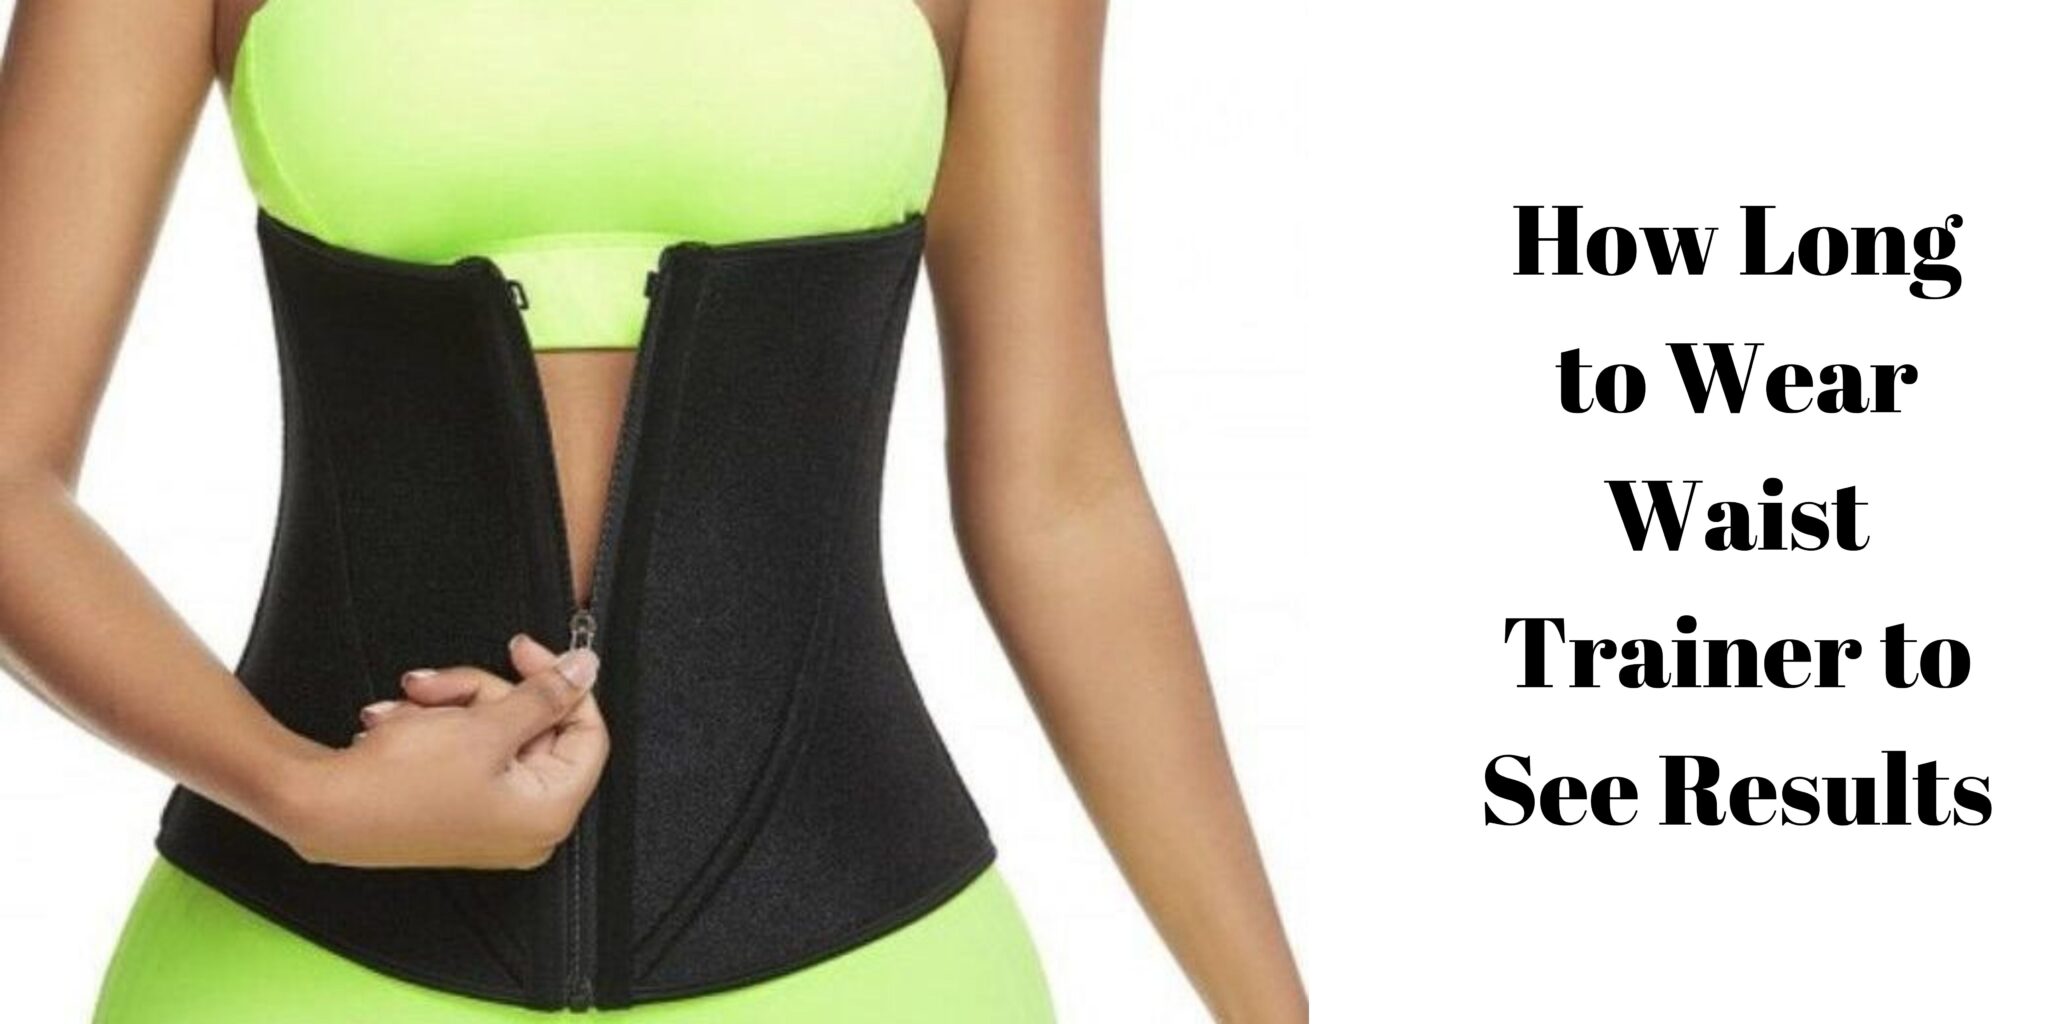 How Long To Wear A Waist Trainer To See Results